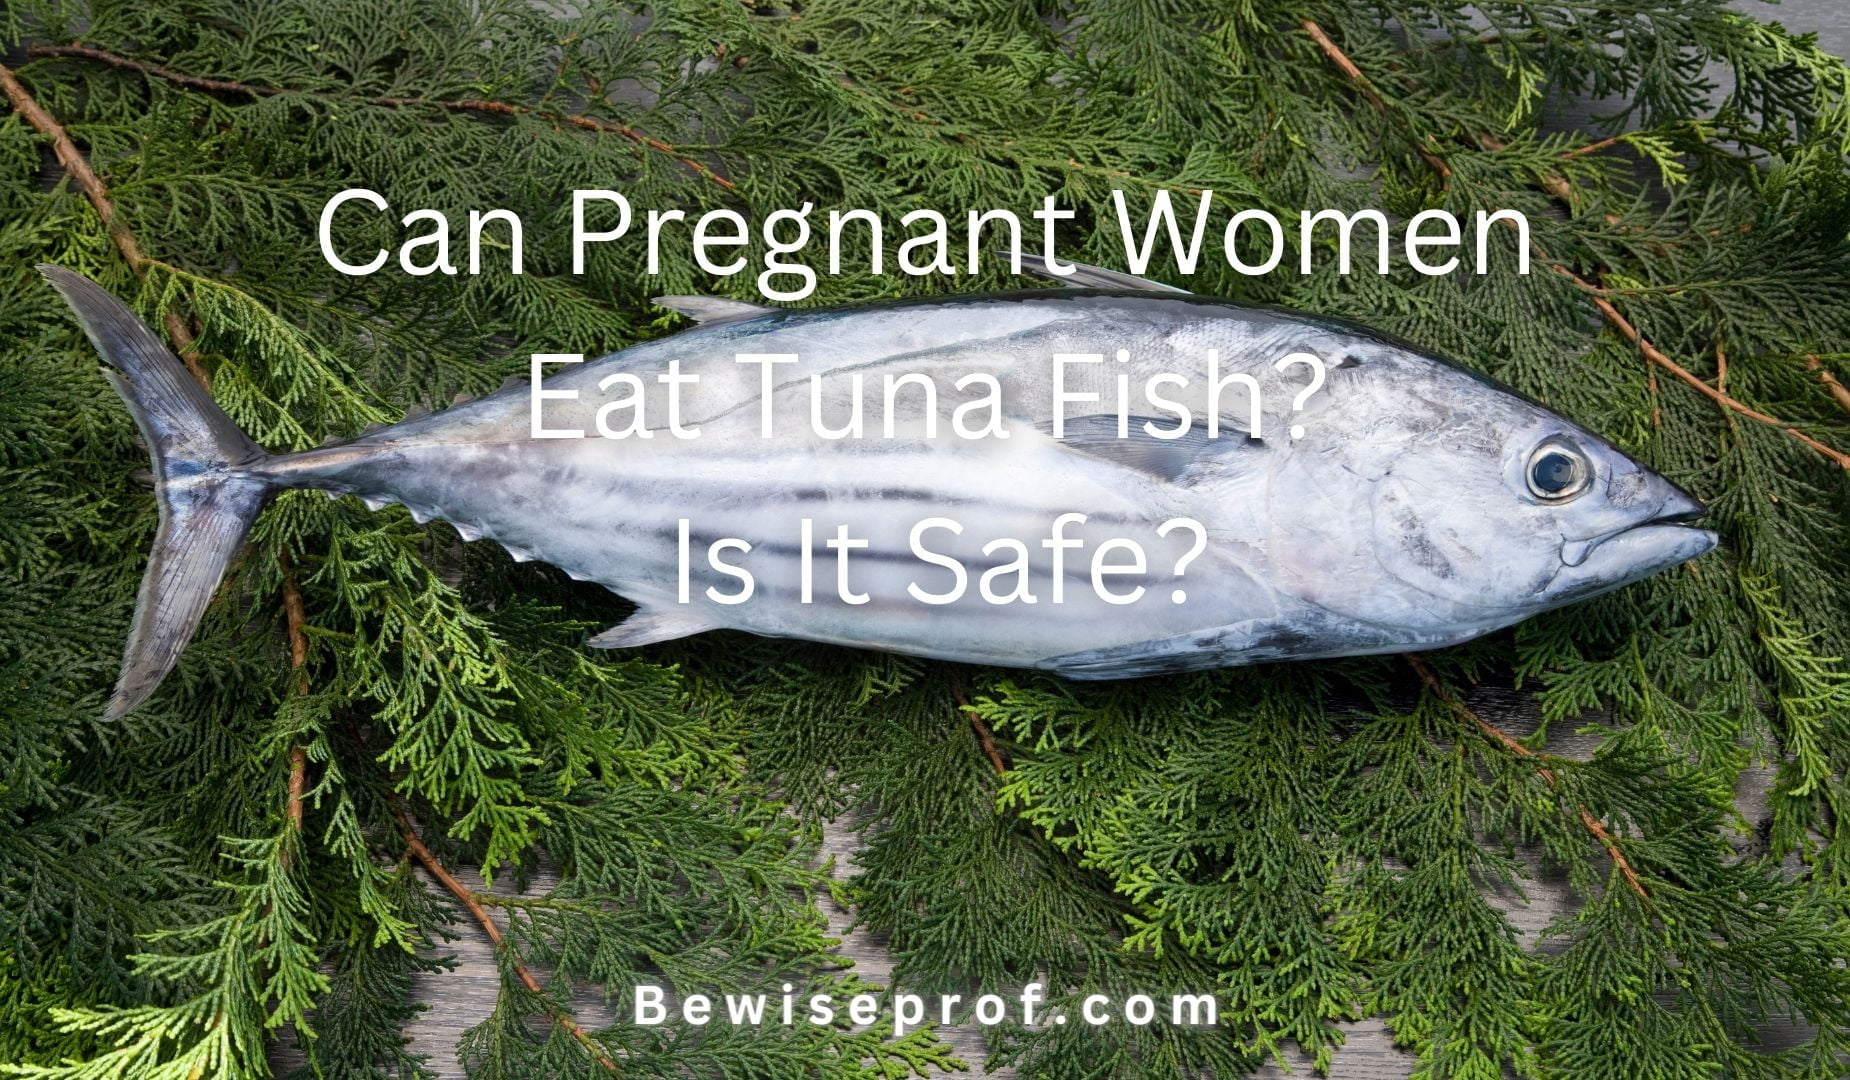 Can Pregnant Women Eat Tuna Fish? Is It Safe?